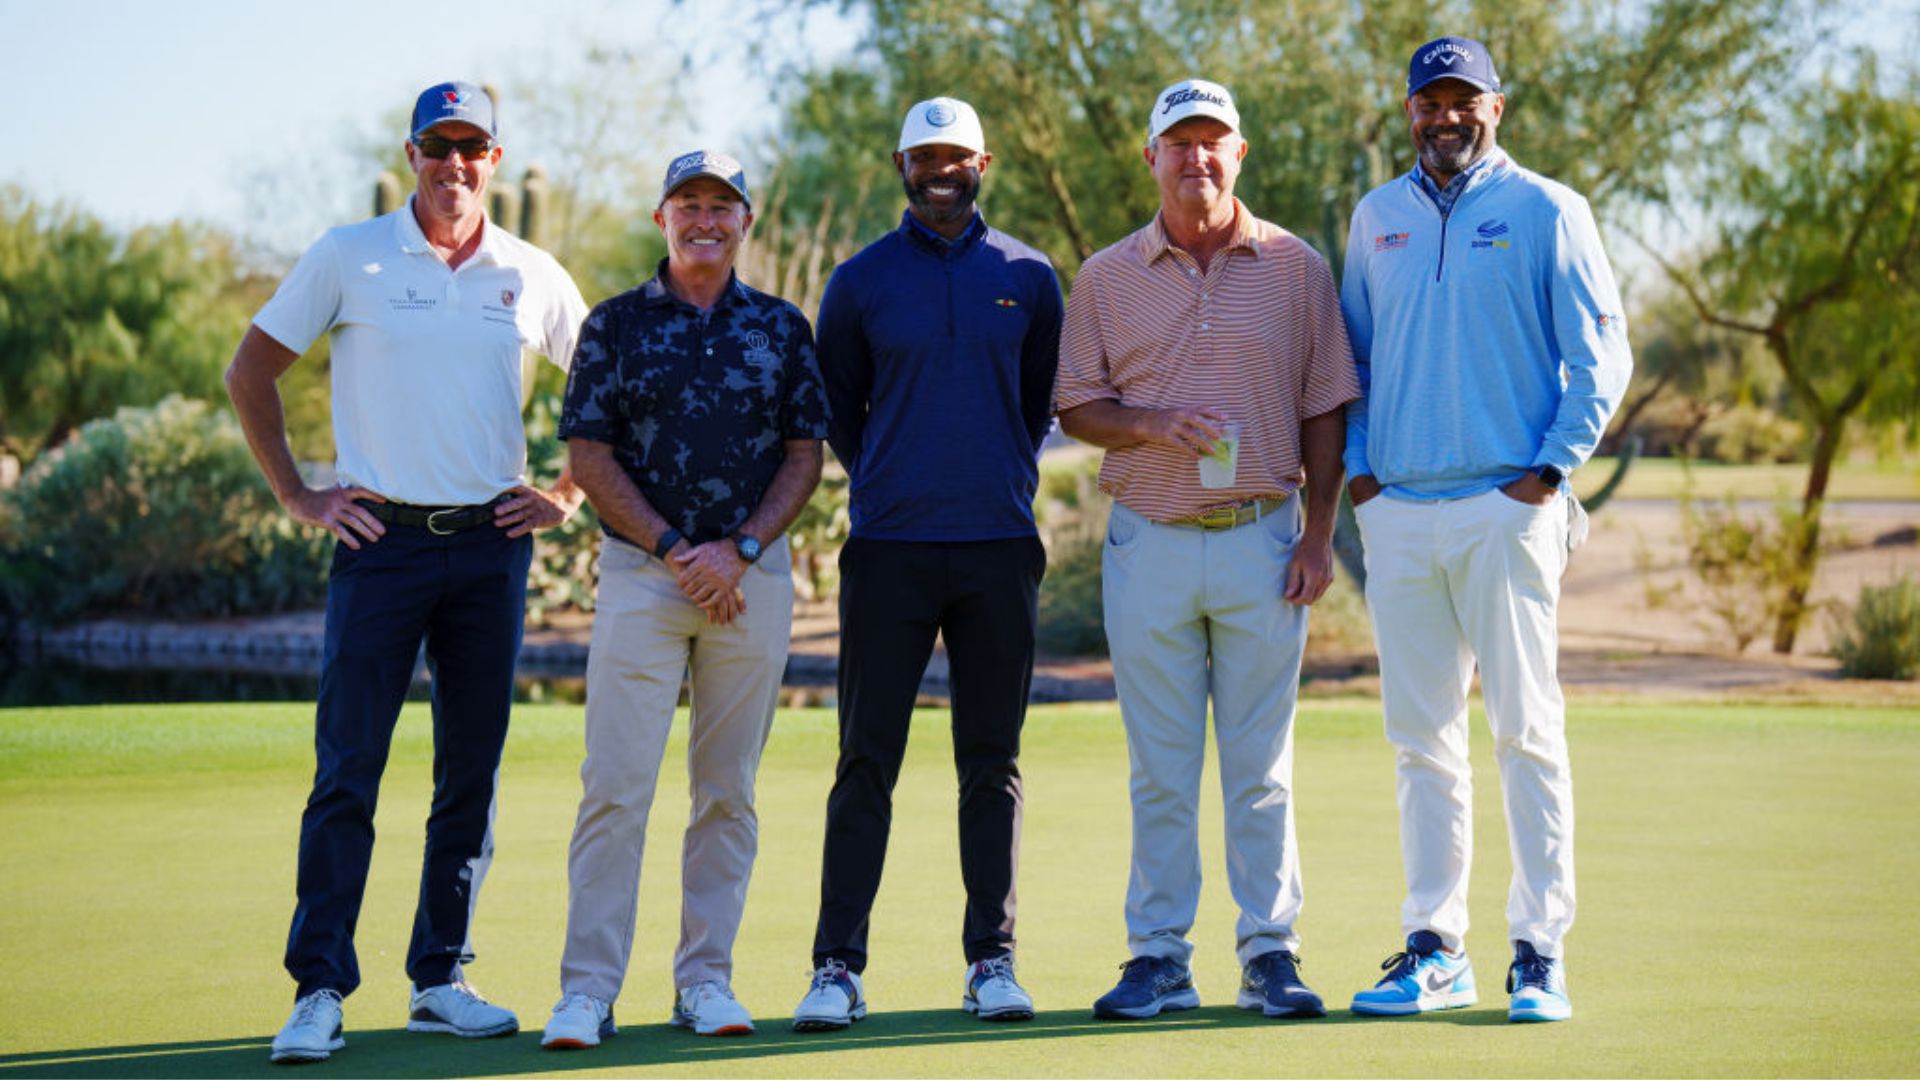 Five players emotionally earn PGA Tour Champions status at Final Stage of Q-School